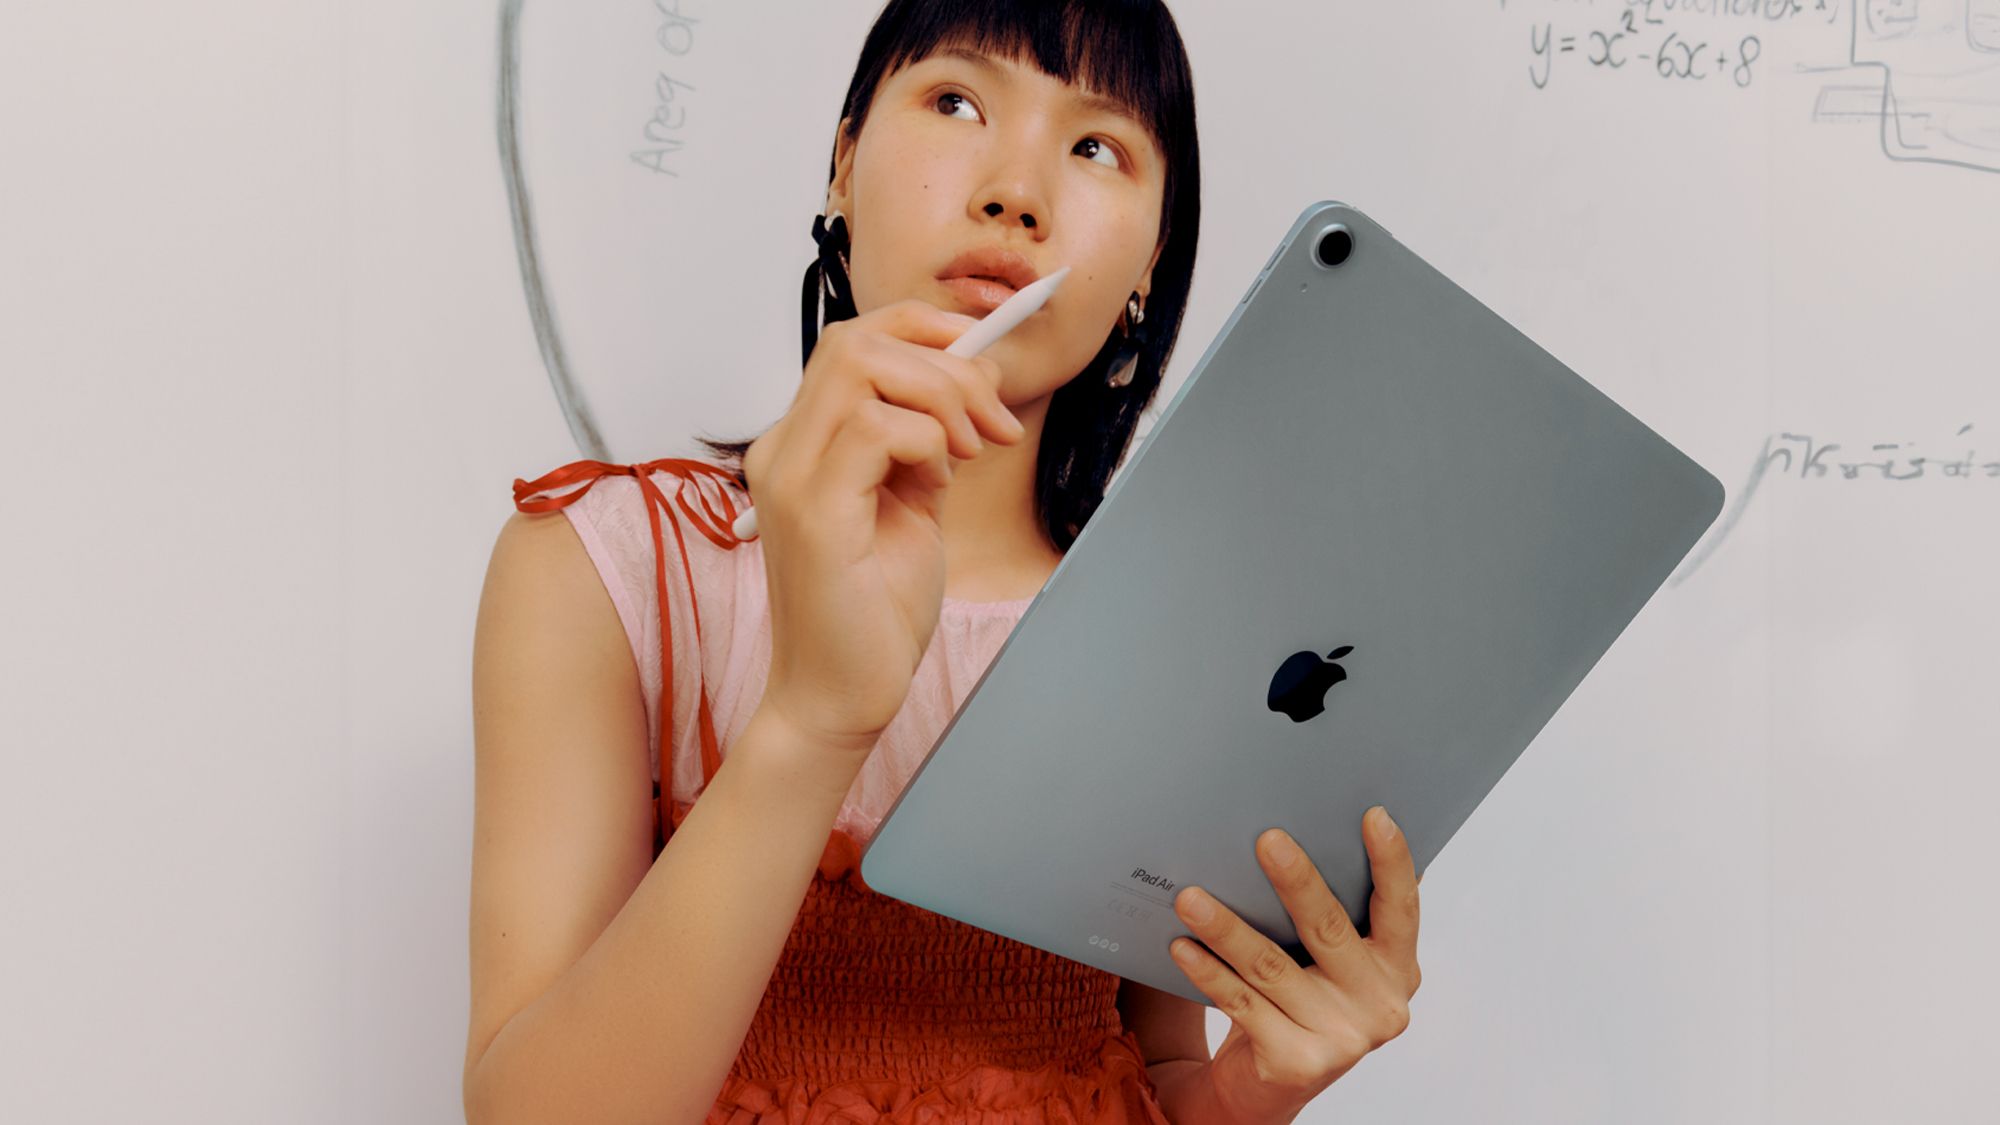 student holding a ipad and apple pencil looking thoughtful while standing against a wall with diagrams and math equations on it